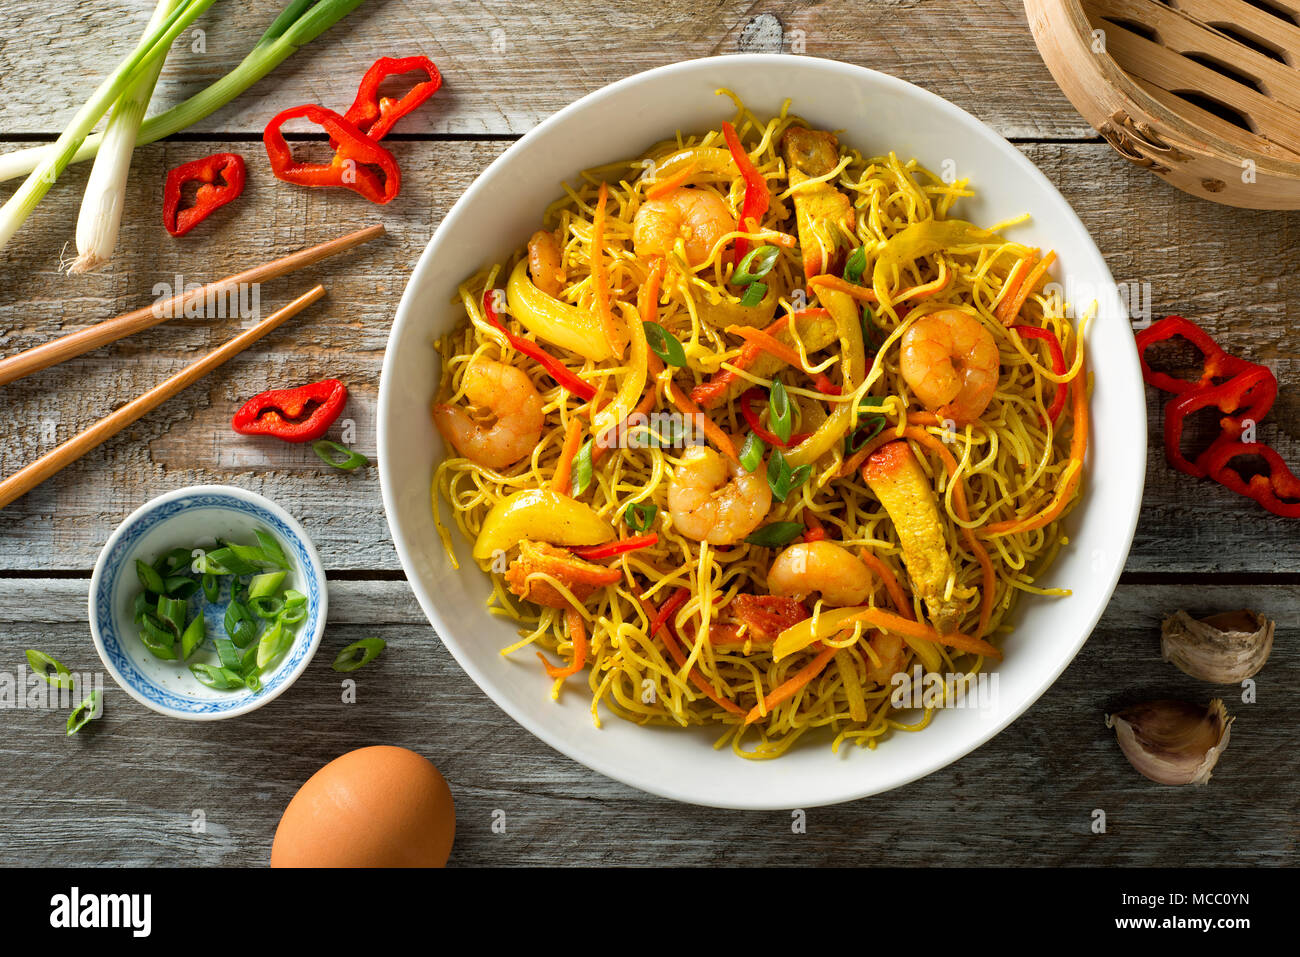 Delicious Singapore style noodles with curry, shrimp, bbq pork, carrots, red pepper, onion and scallions. Stock Photo